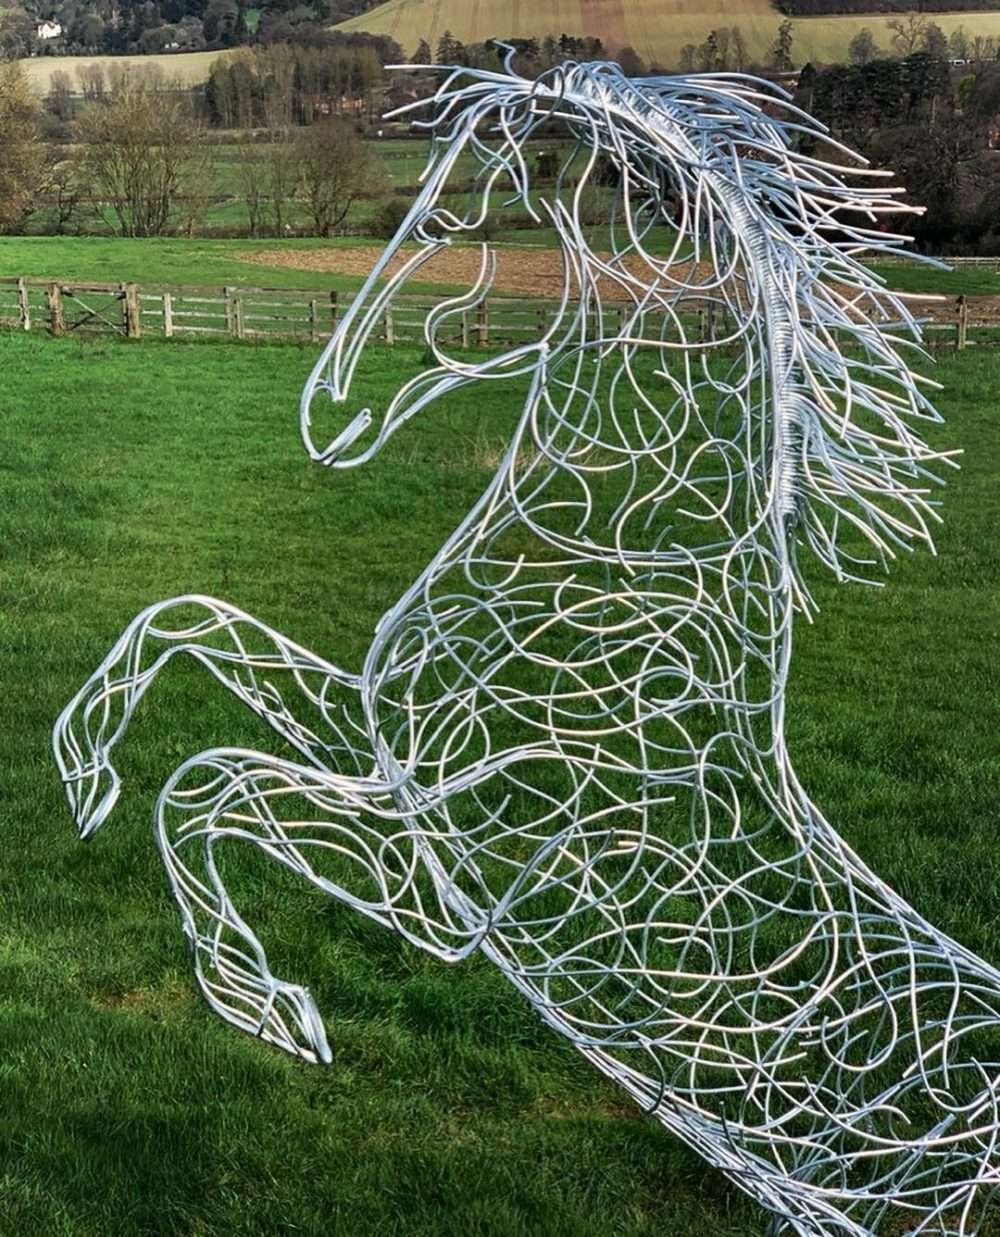 Large Silver Galvanised Rearing Horse Sculpture